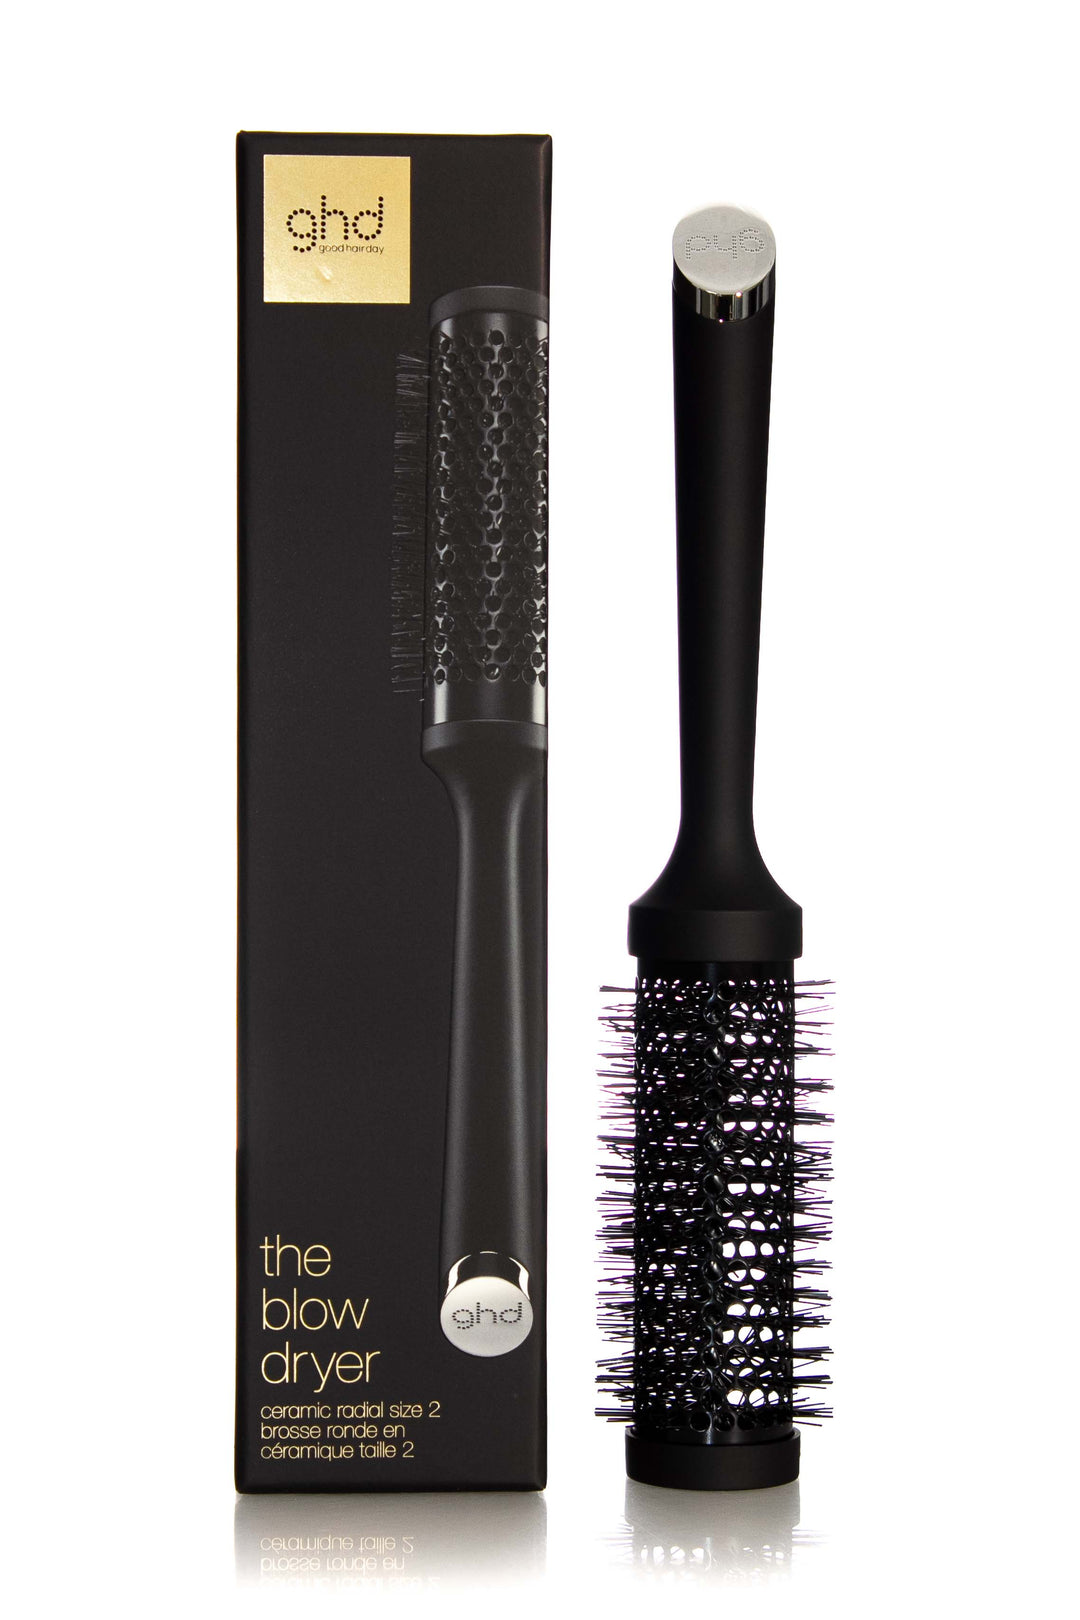 GHD THE BLOW DRYER CERAMIC RADIAL BRUSH SIZE 2